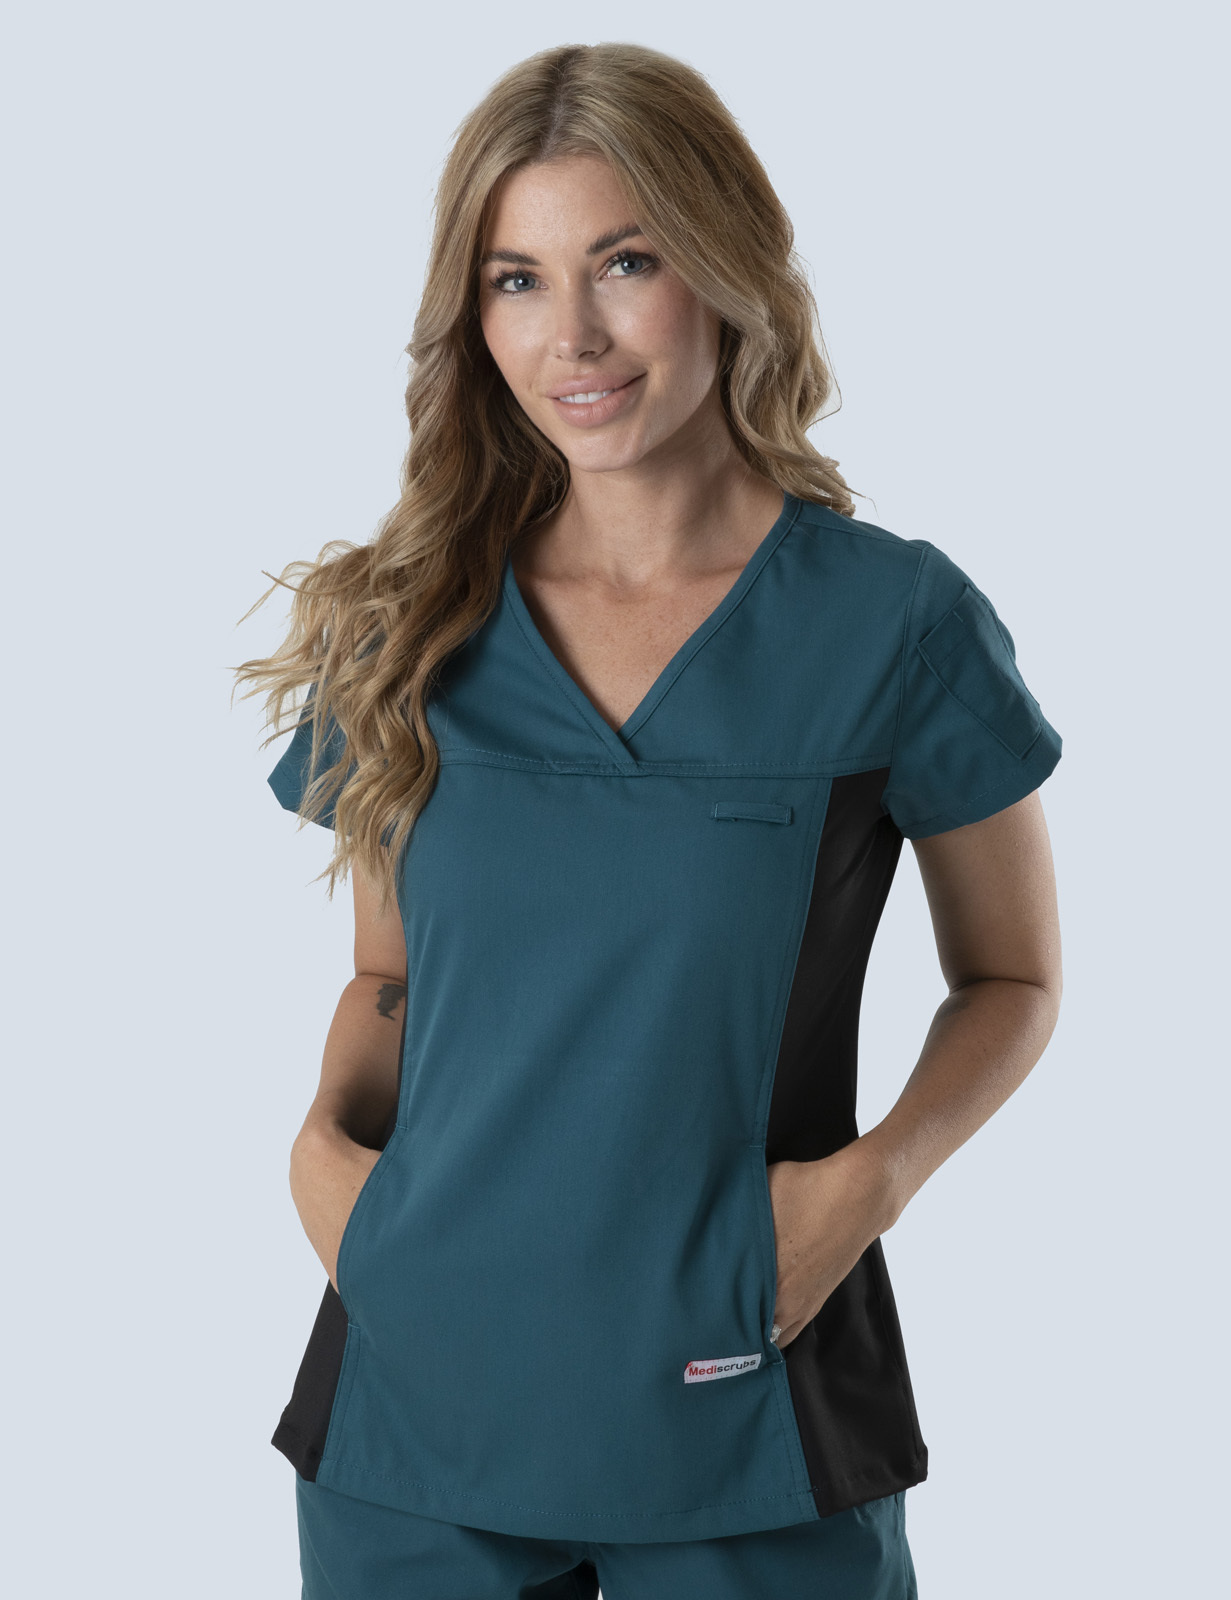 UQ Vets Gatton Anaesthesia Uniform Top Only Bundle (Women's Fit Spandex Top in Caribbean incl Logos)